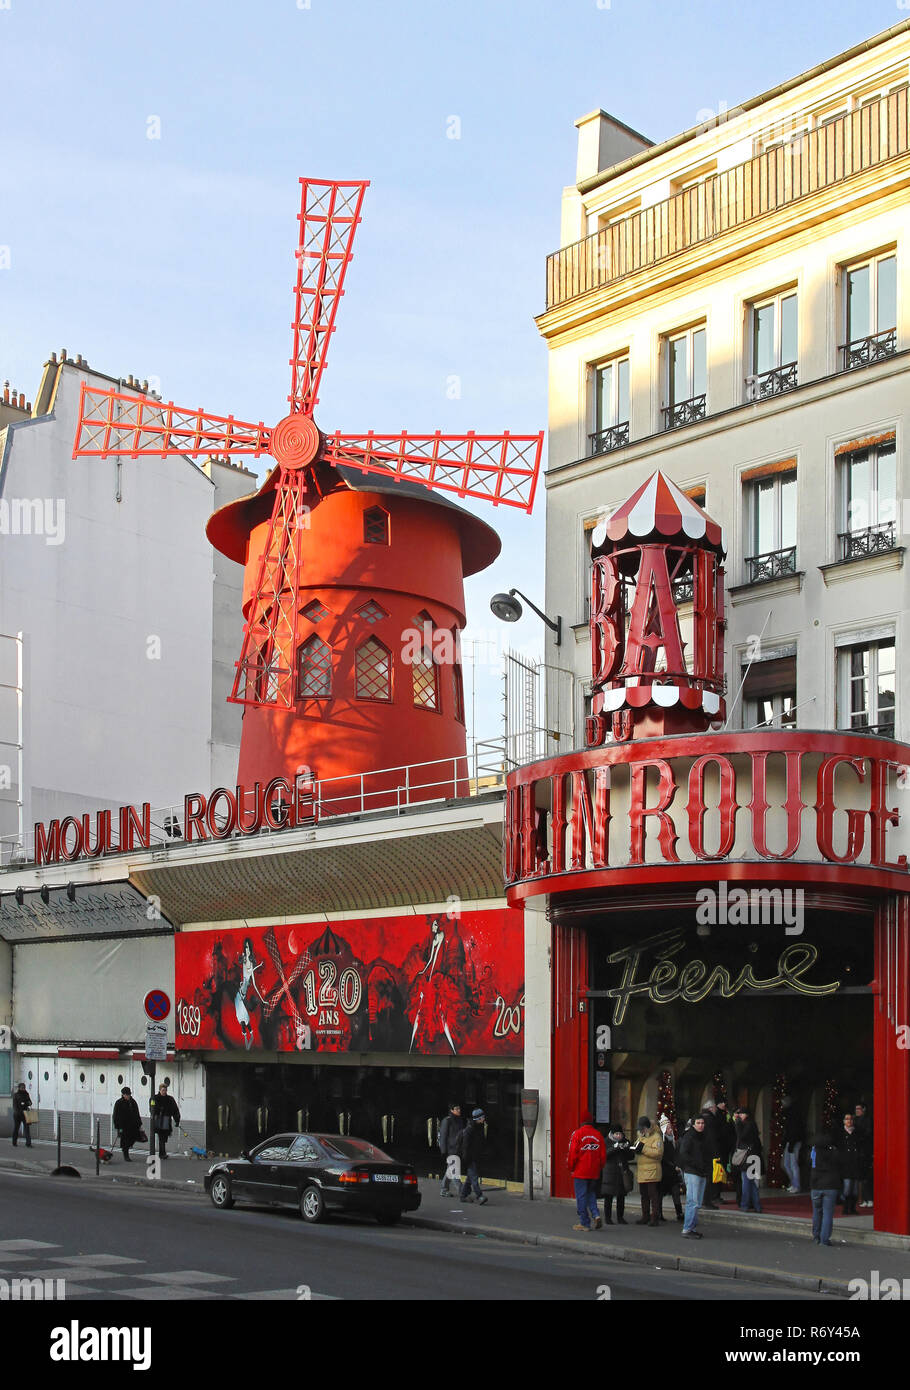 PARIS, FRANCE - JANUARY 5: Moulin on 5, 2010. Big Red Windmill Landmark famous for can can dance at Pigalle in Paris, France Stock Photo - Alamy